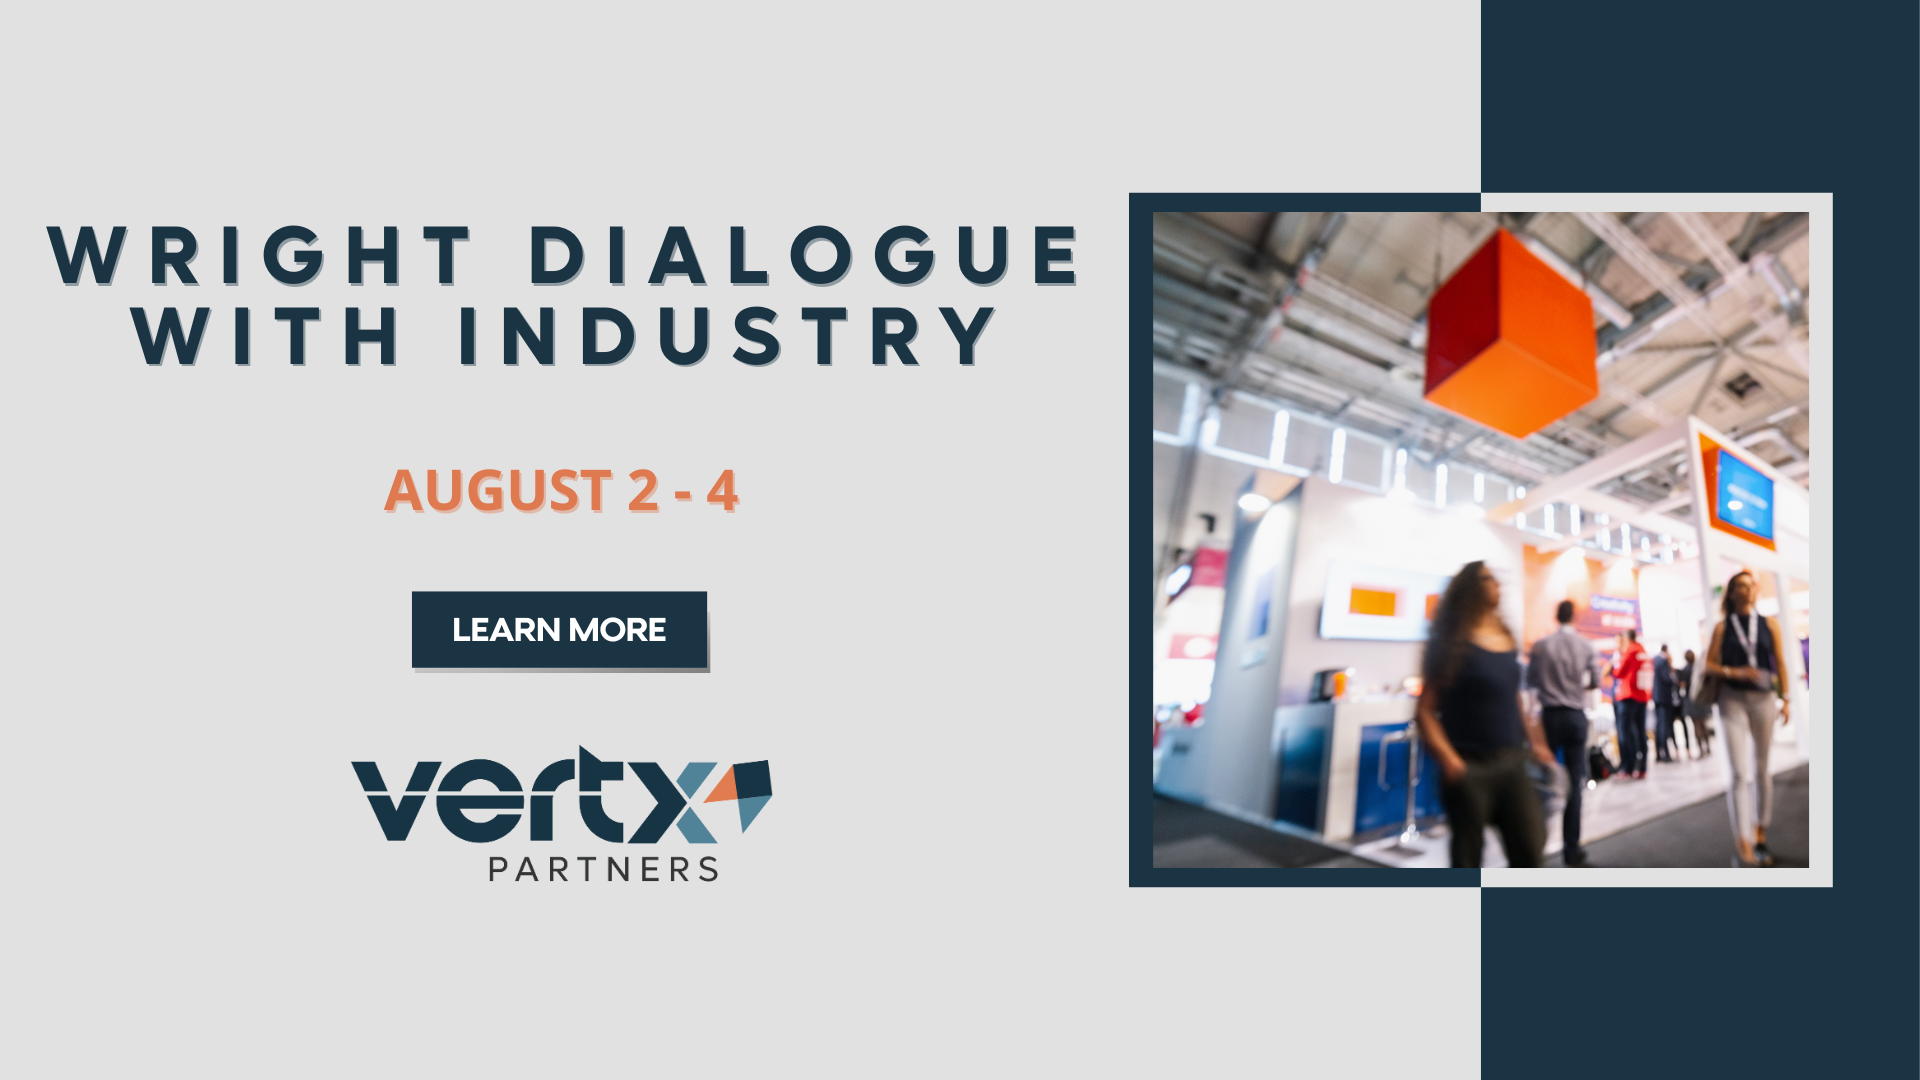 This graphic has the title "Wright Dialogue with Industry" with the dates August 2 - 4 underneath a photo of a busy conference that is blurry.